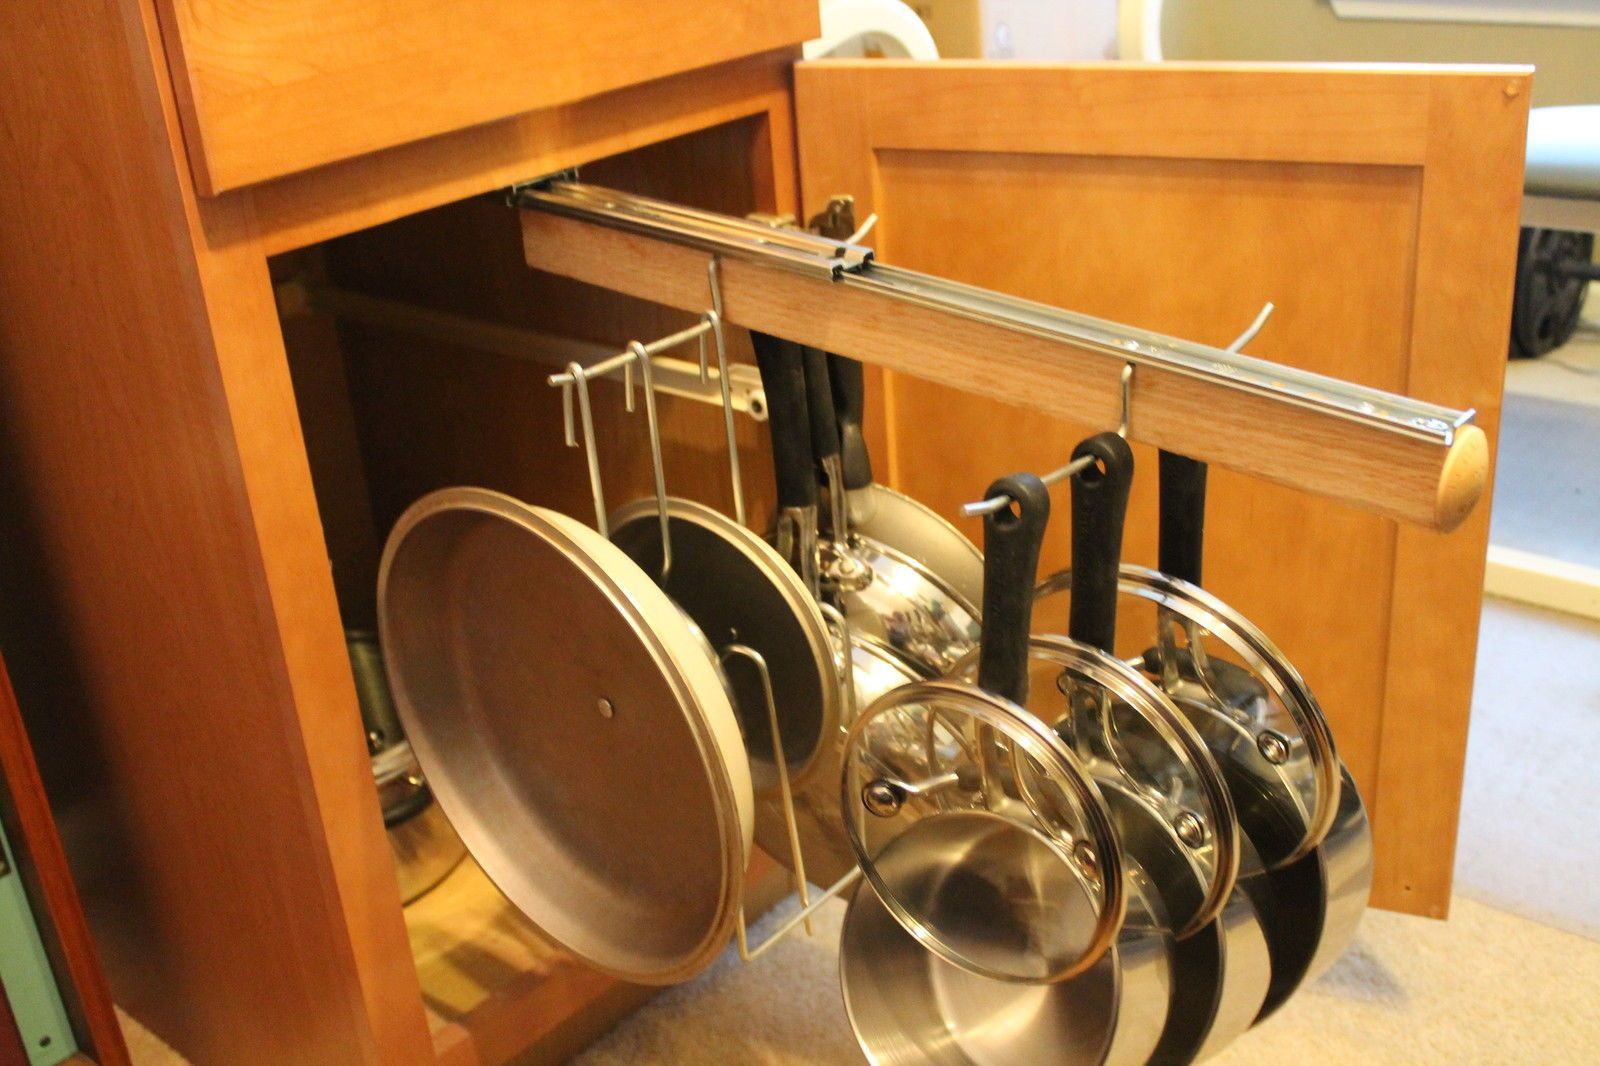 DIY Pot And Pan Organizer
 Details about Pull Out Under Cabinet Hanging Pot and Pan